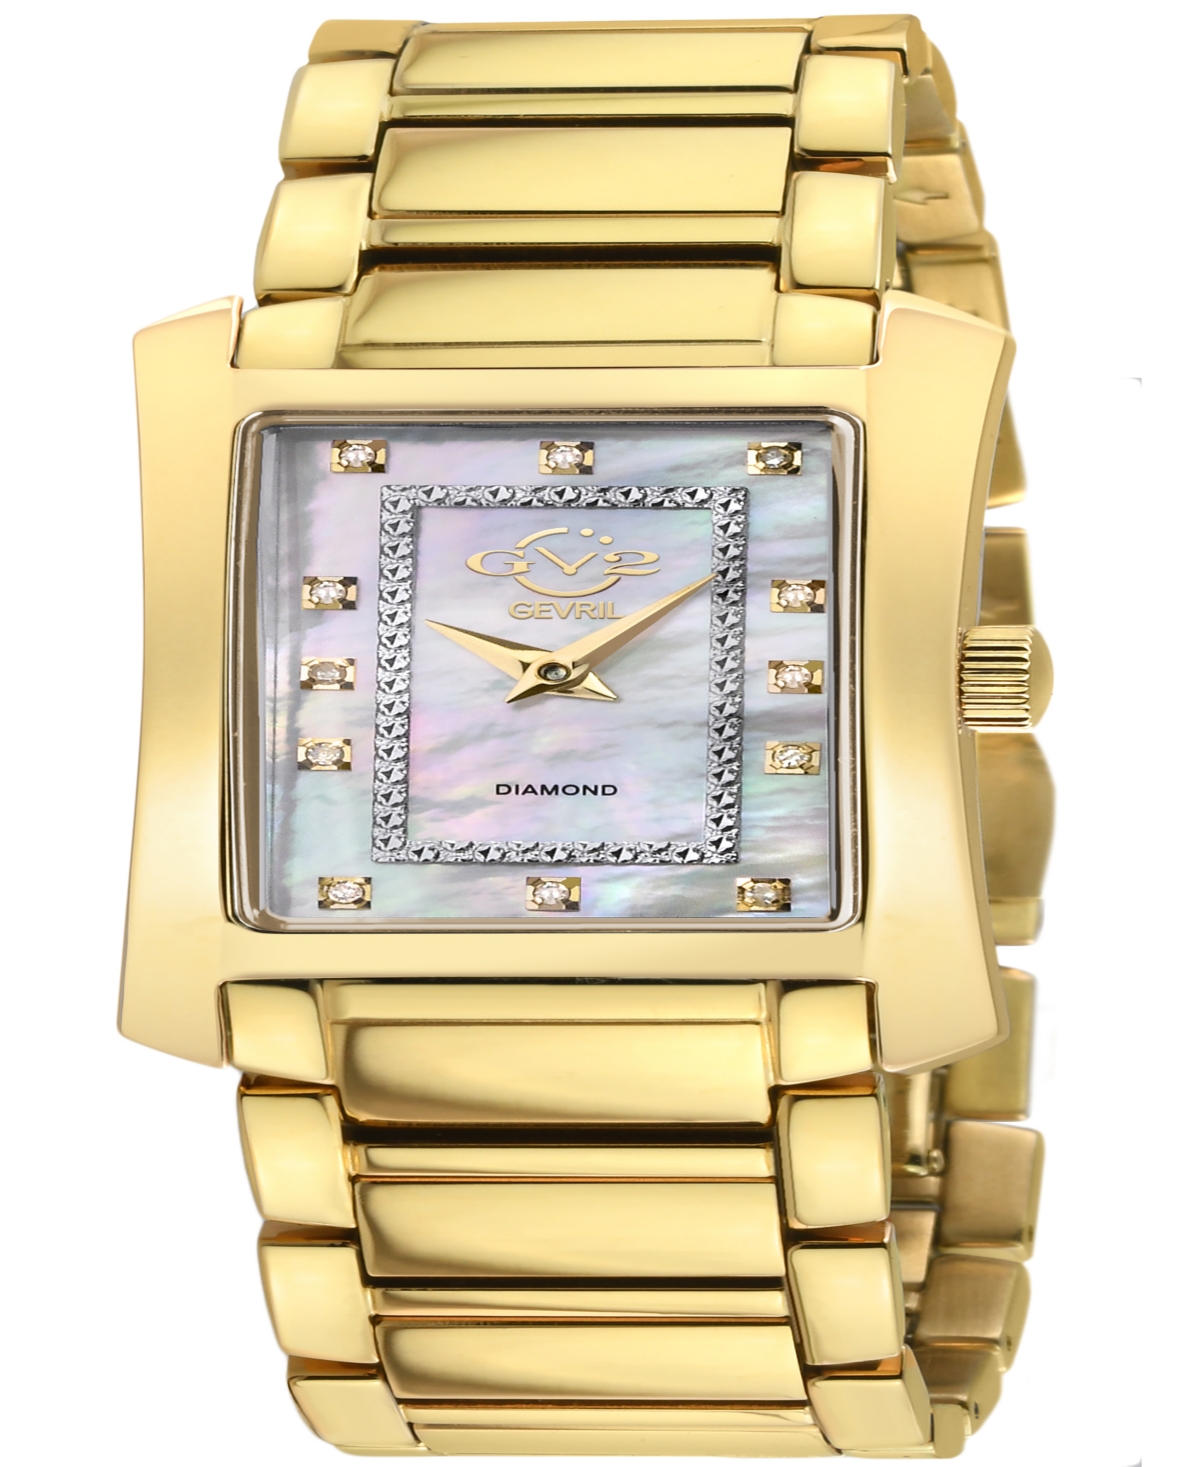 Gv2 By Gevril Women's Luino Gold-tone Stainless Steel Watch 29mm